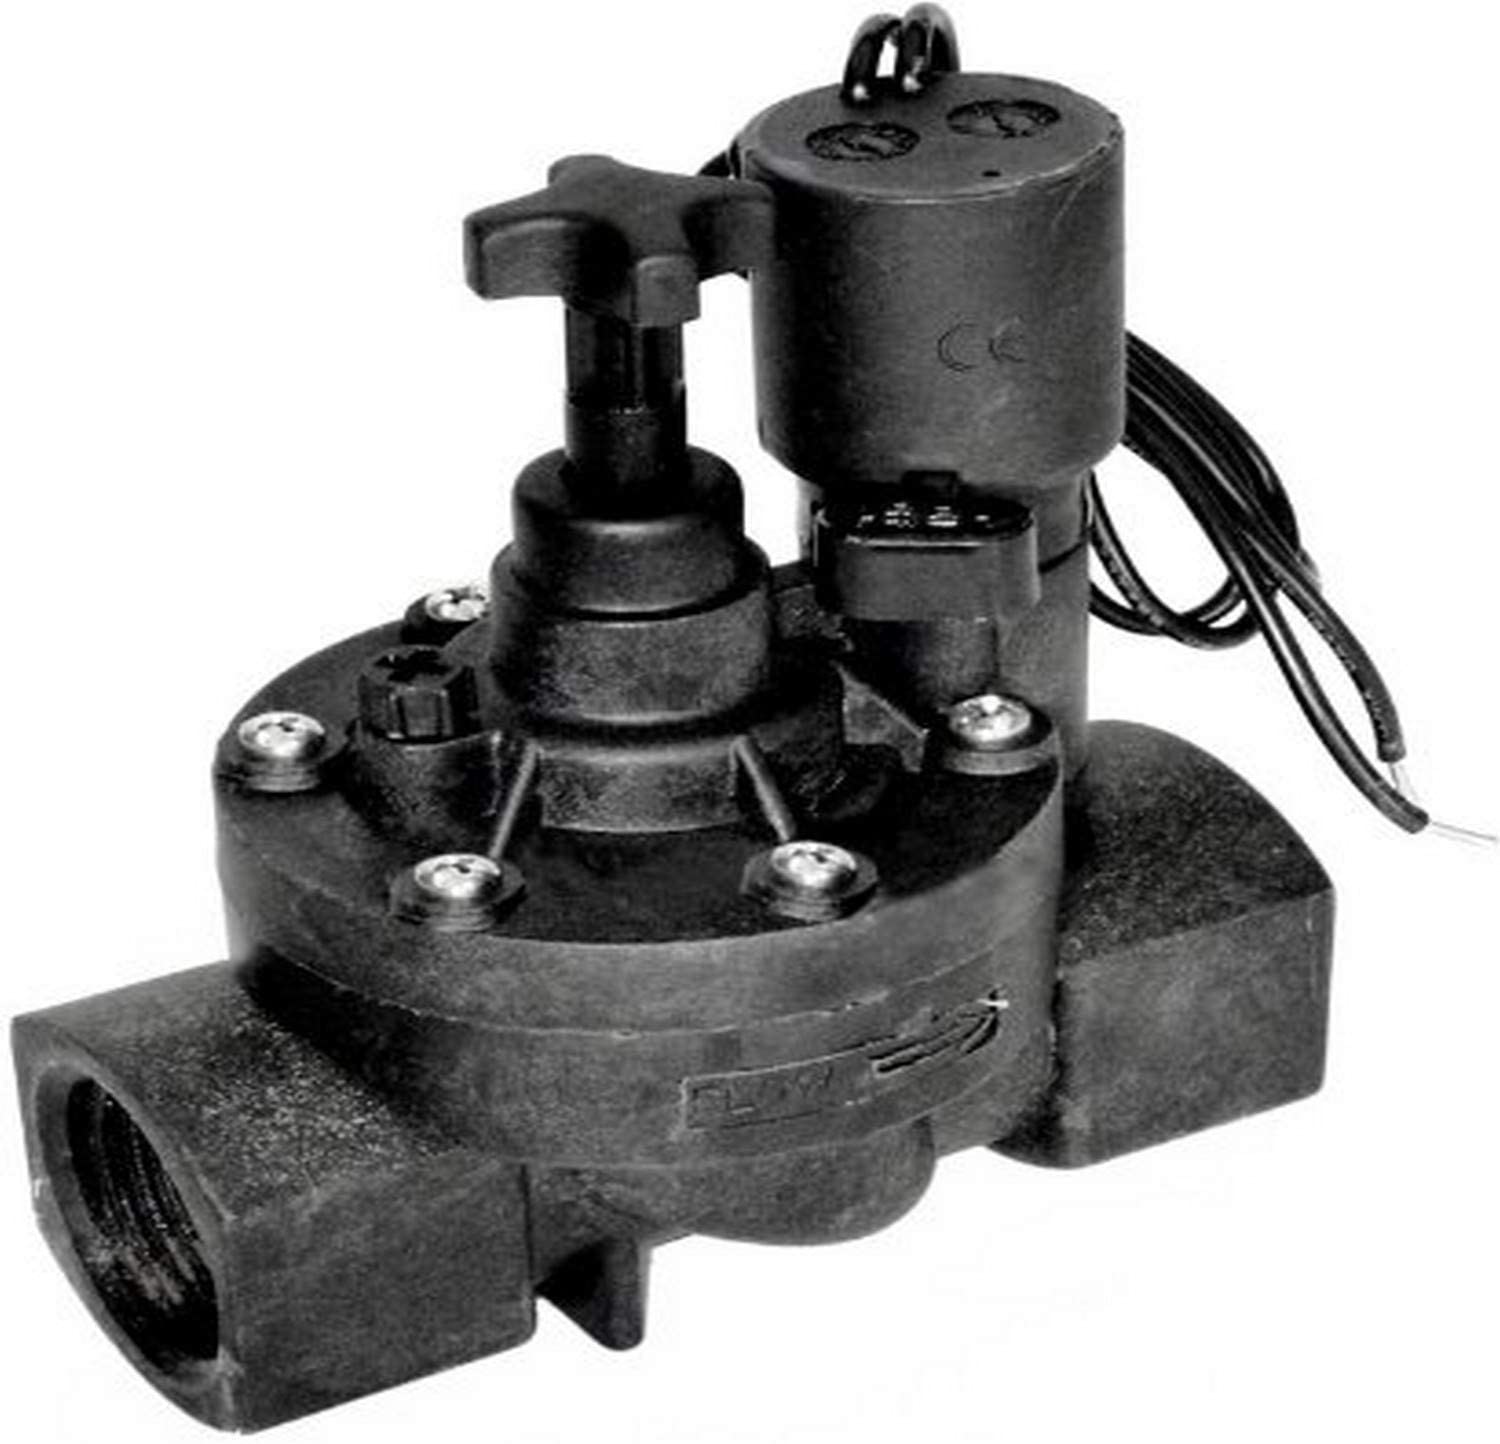 Levolor R-Kit 1" Plastic Valve, 24V Solenoid With Flow Control - SOL100 - The Pool Supply Warehouse